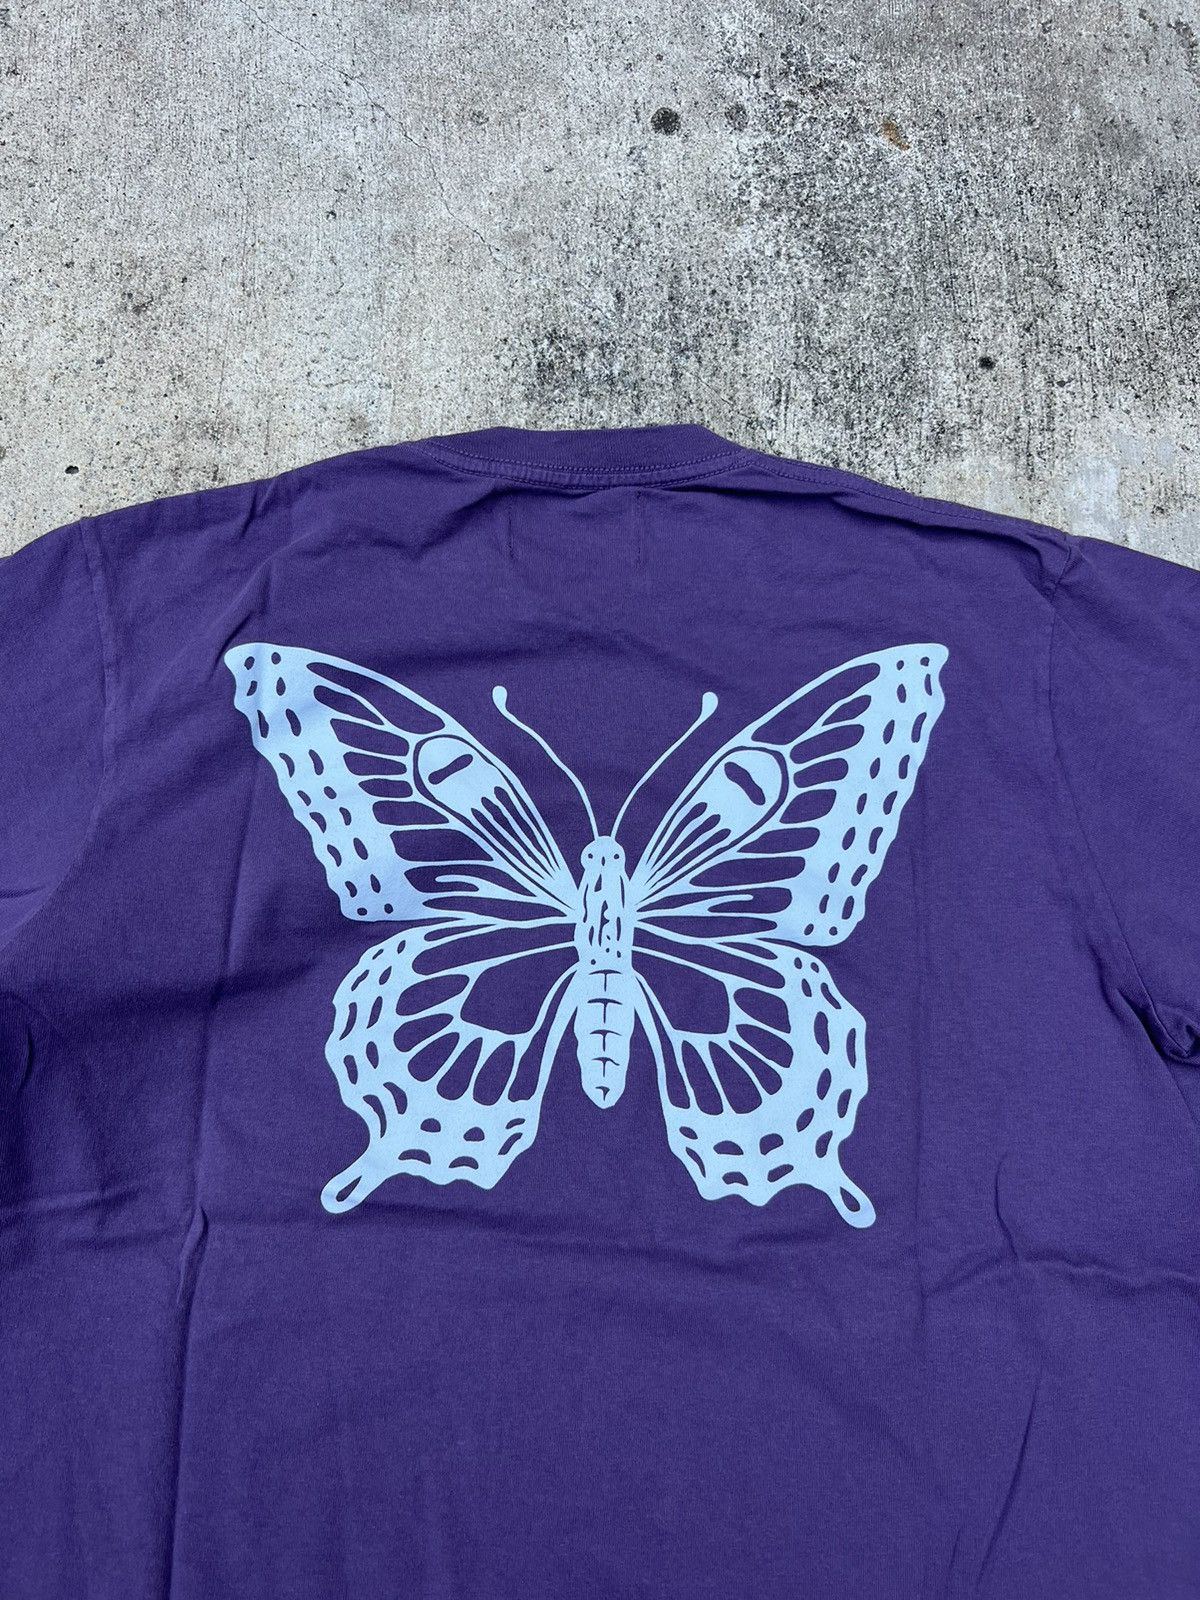 Union La GIRLS DONT CRY x EcoLife Butterfly Tee | Grailed